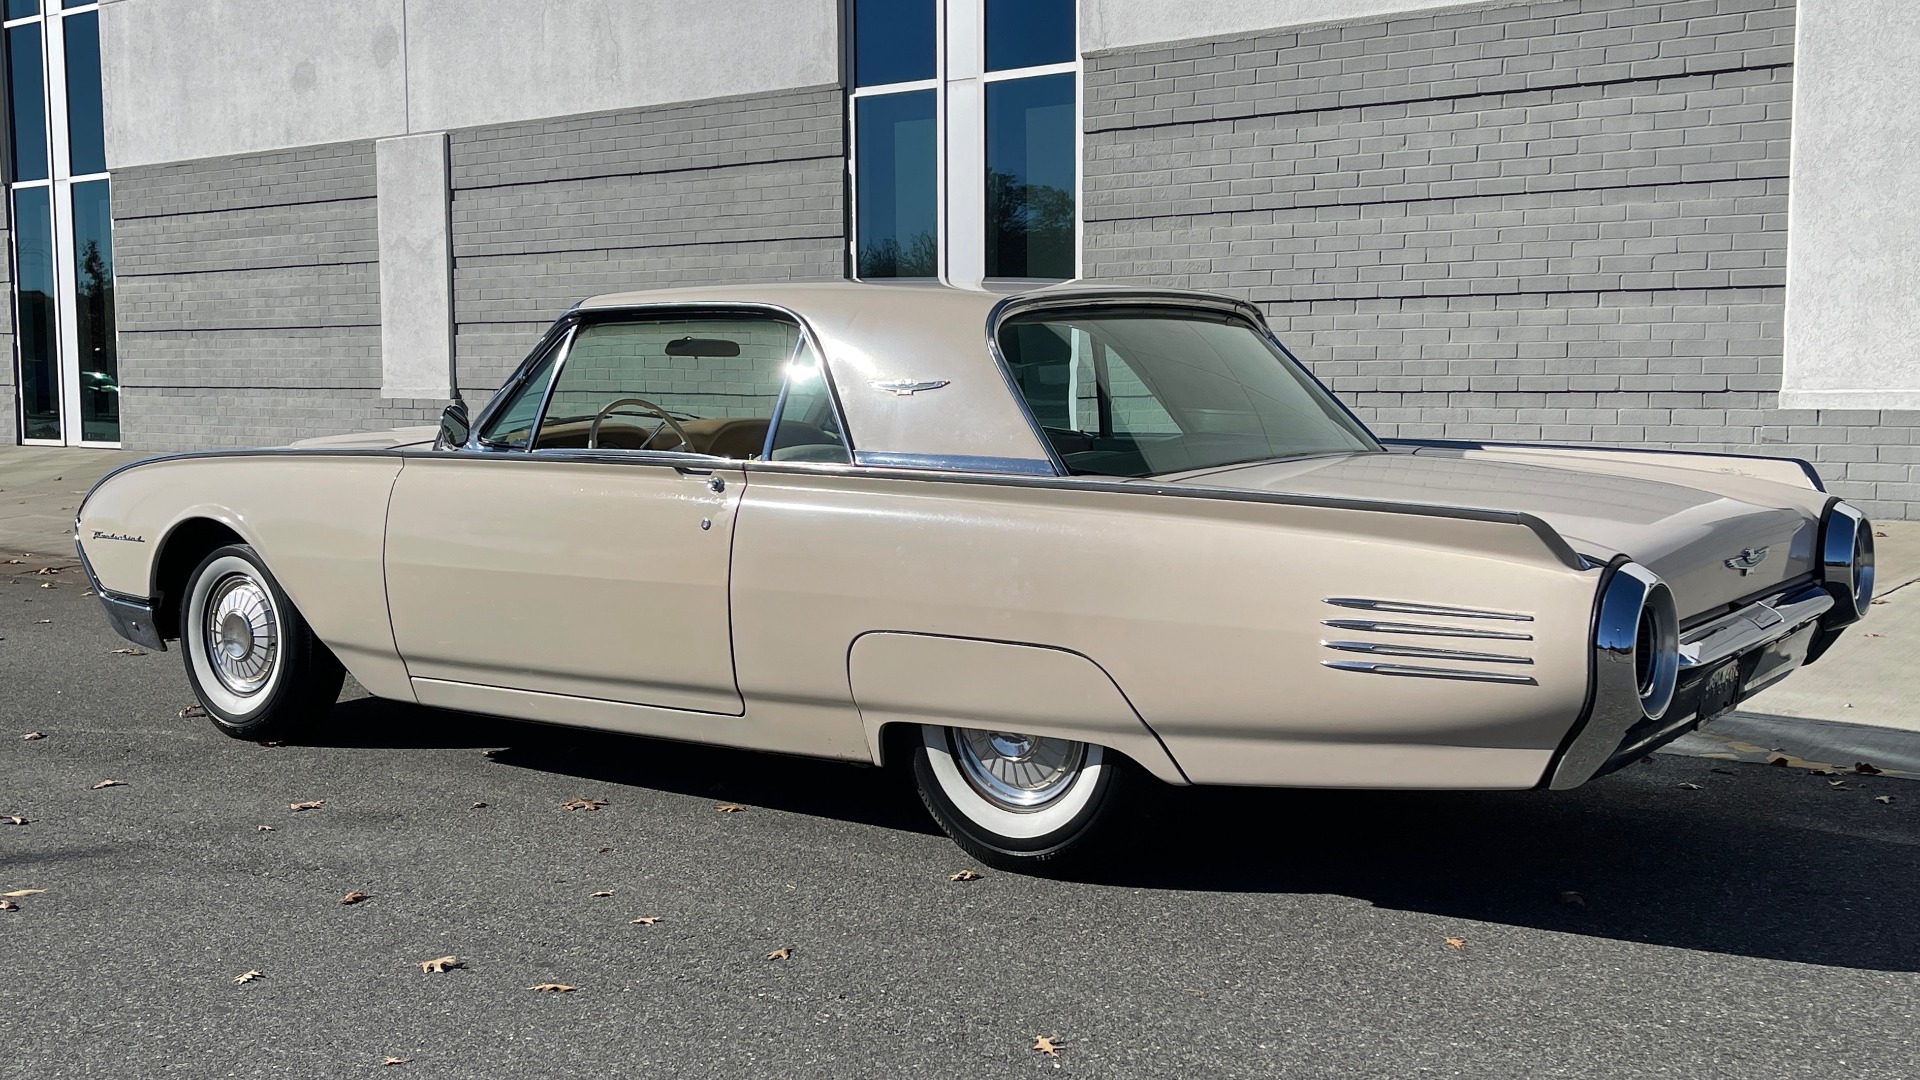 Used 1961 Ford THUNDERBIRD HARDTOP / 390CI V8 / AUTO TRANS / LOW MILEAGE SURVIVOR for sale $19,995 at Formula Imports in Charlotte NC 28227 6